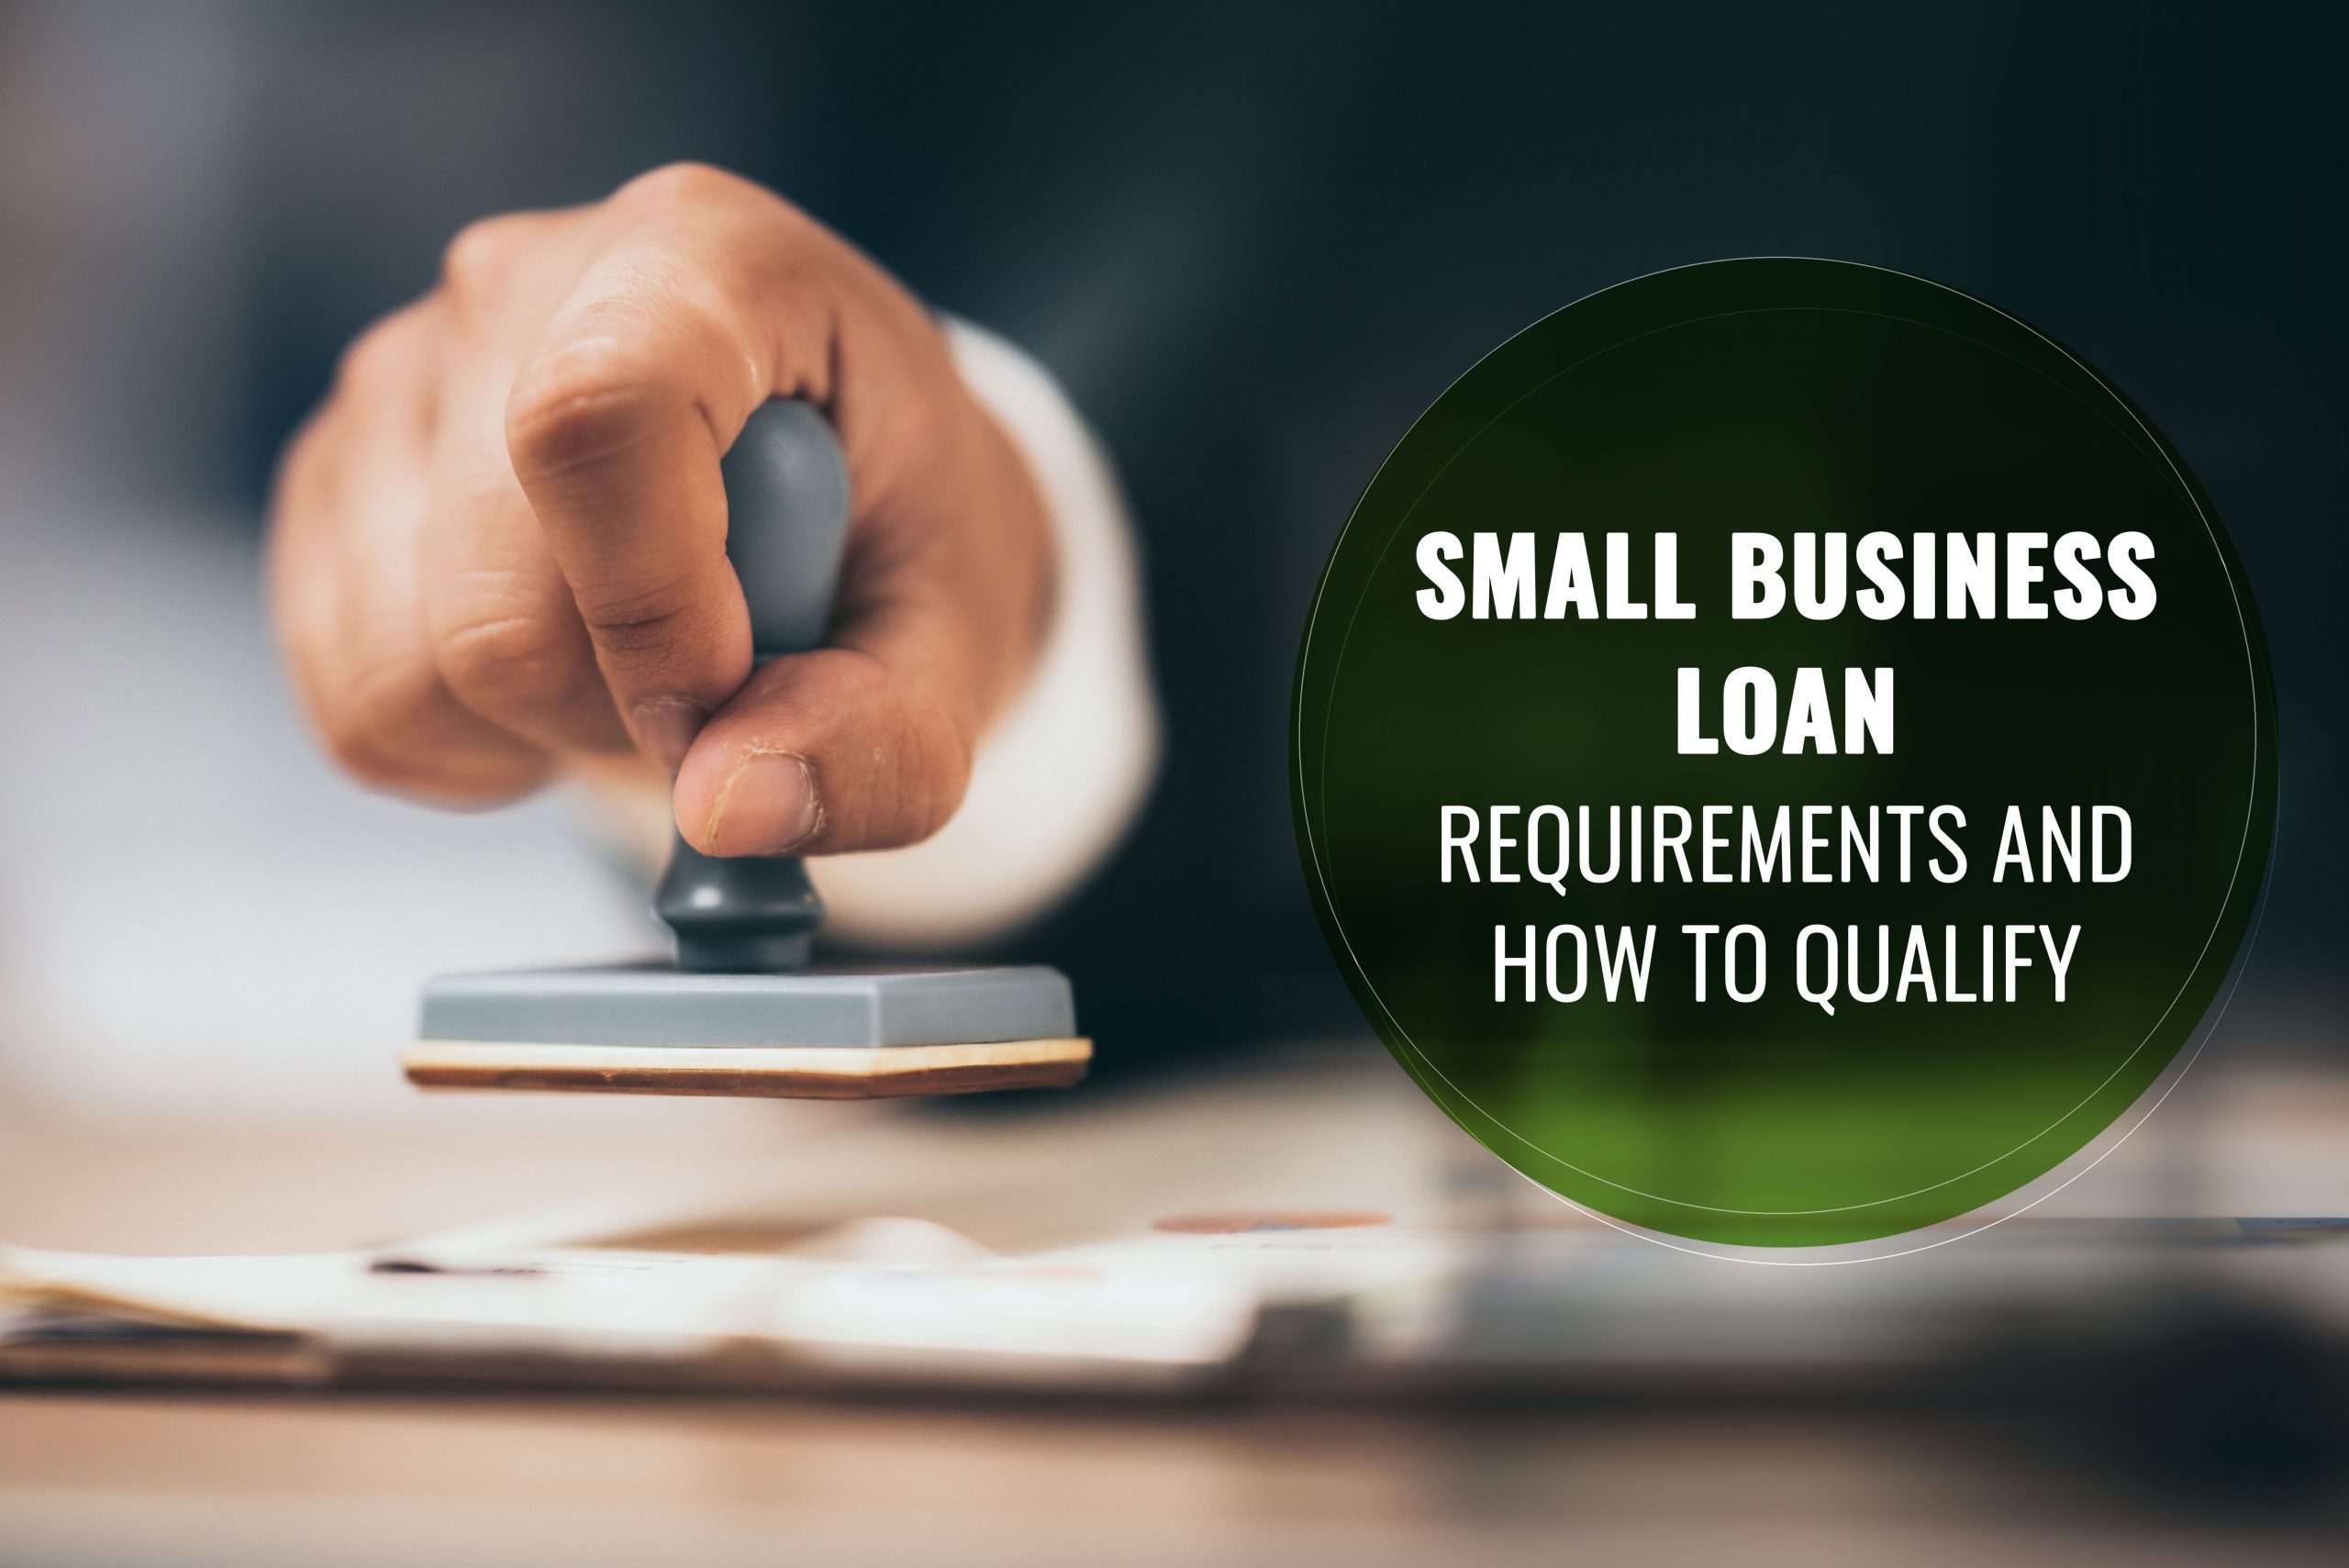 Small Business Loan Requirements and How To Qualify